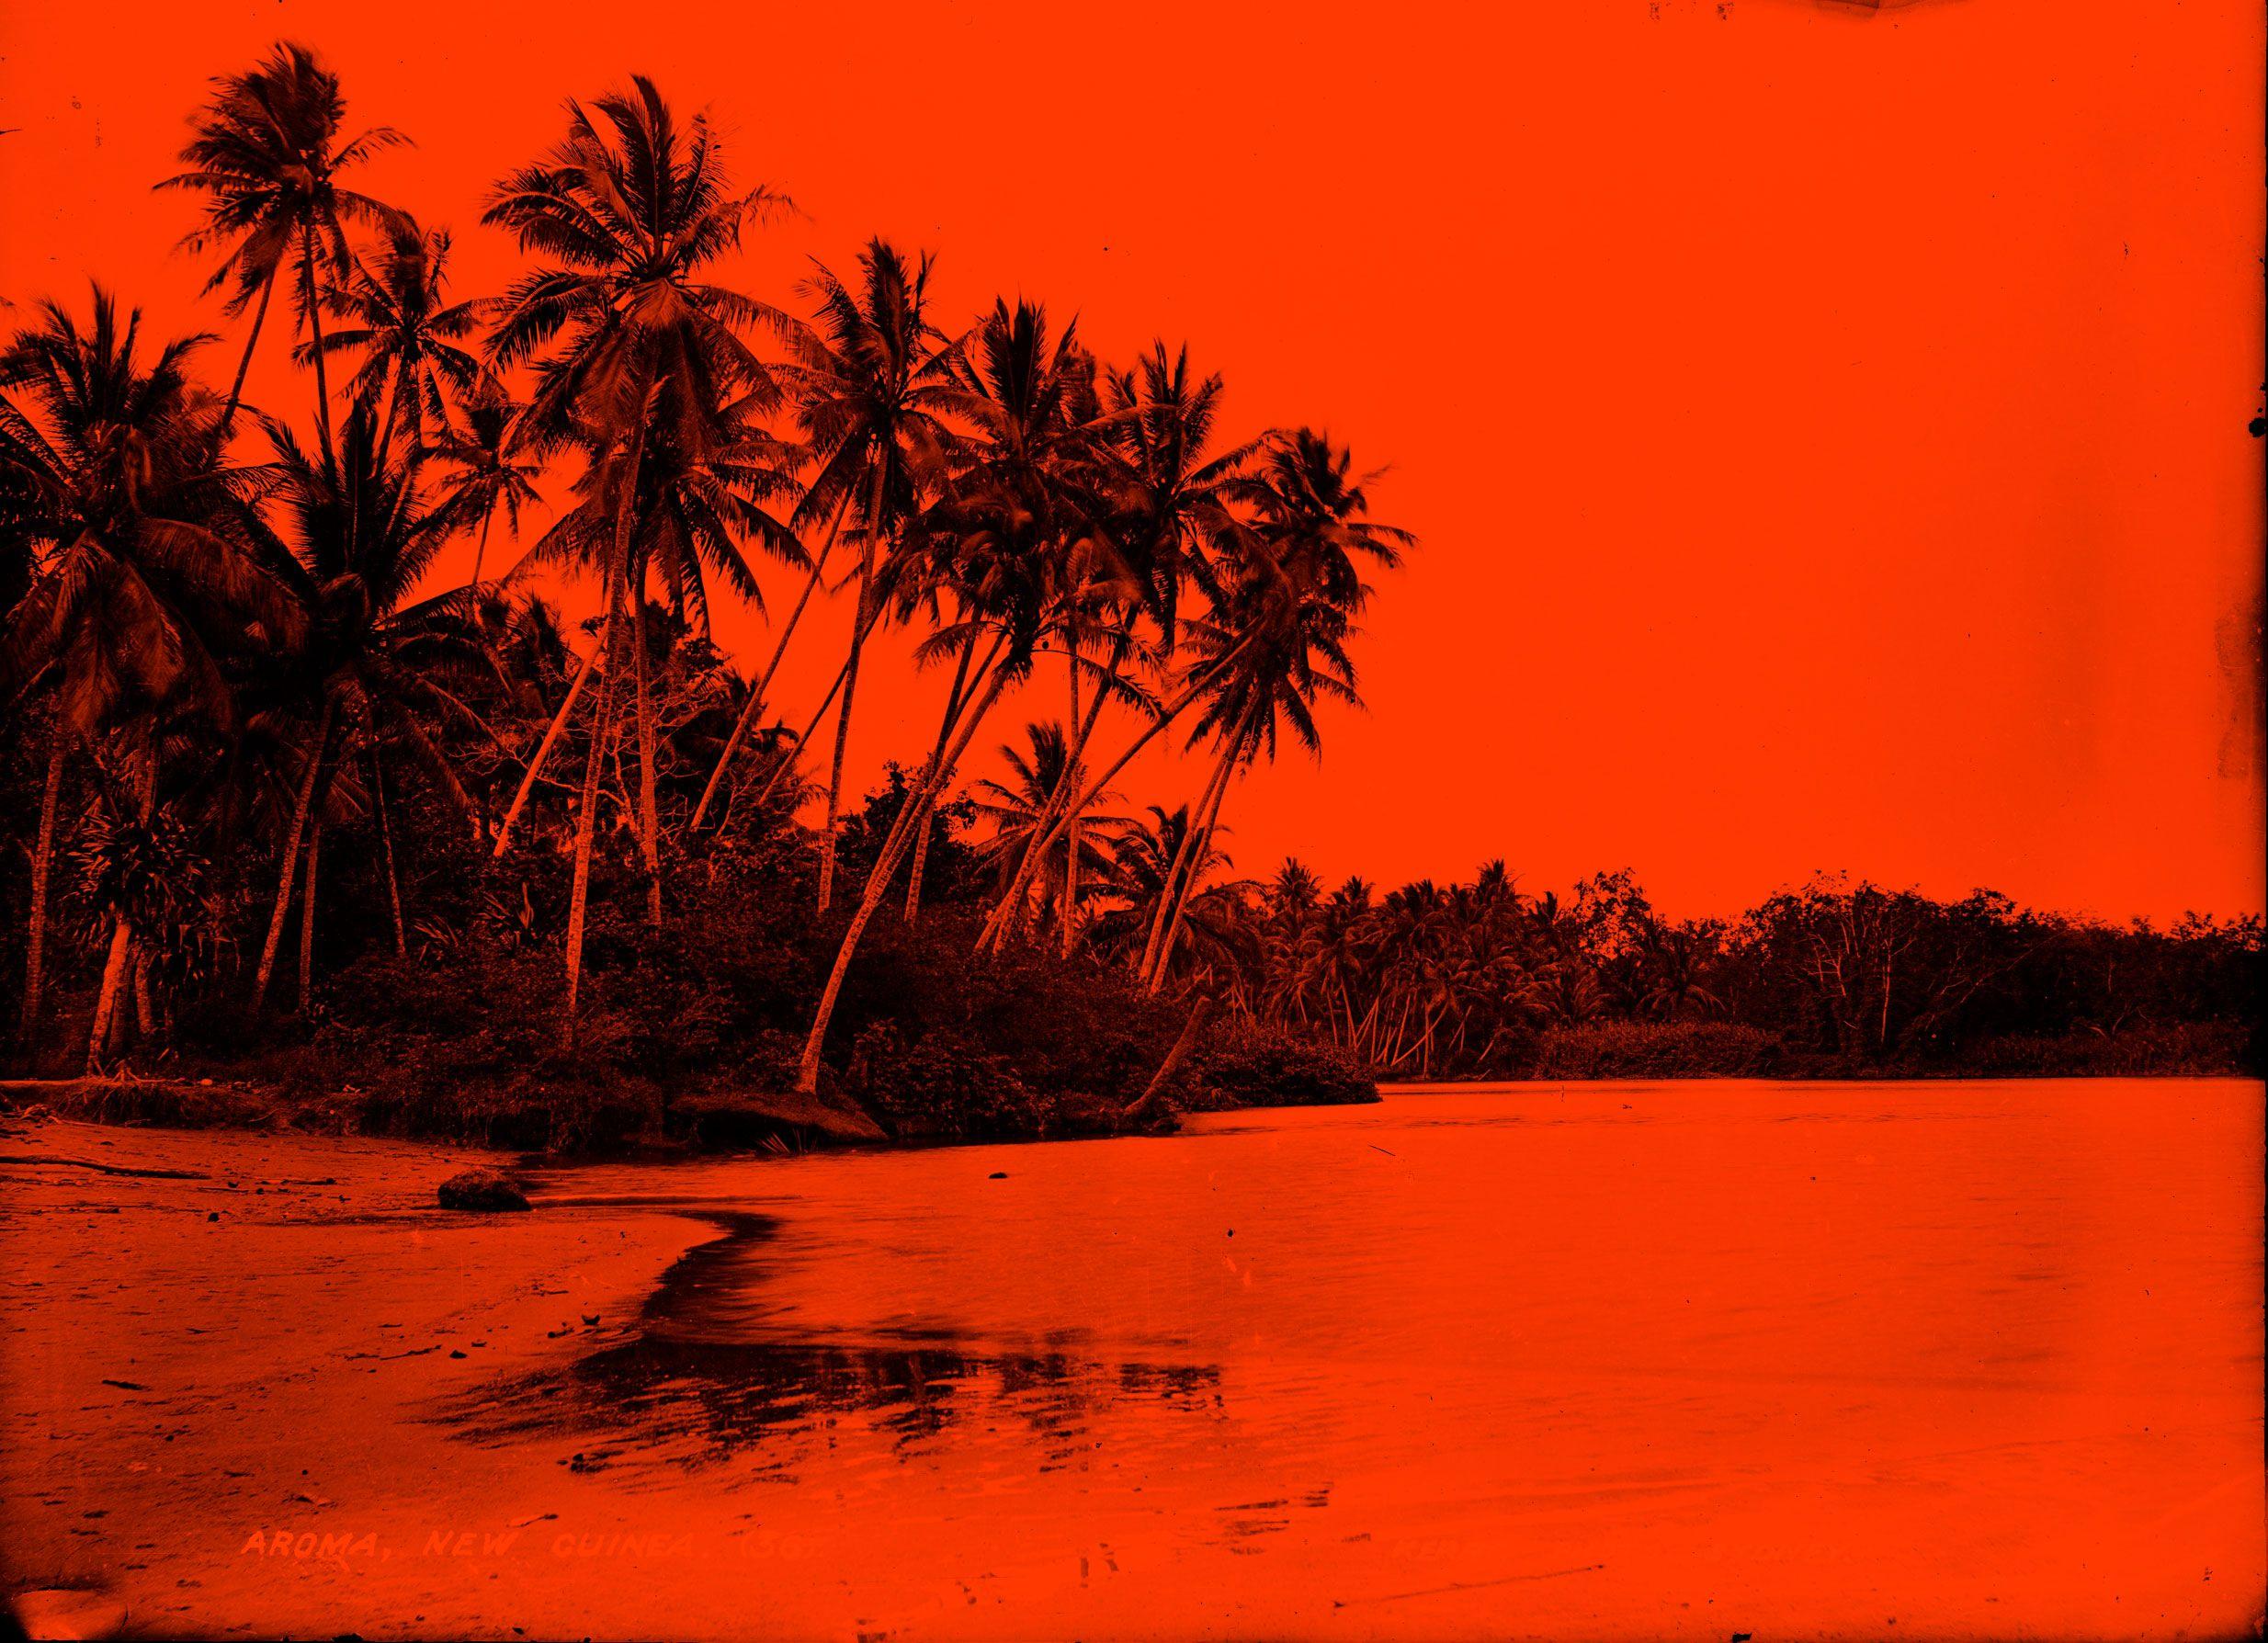 A photograph of a beach with palmtrees, tinted red.